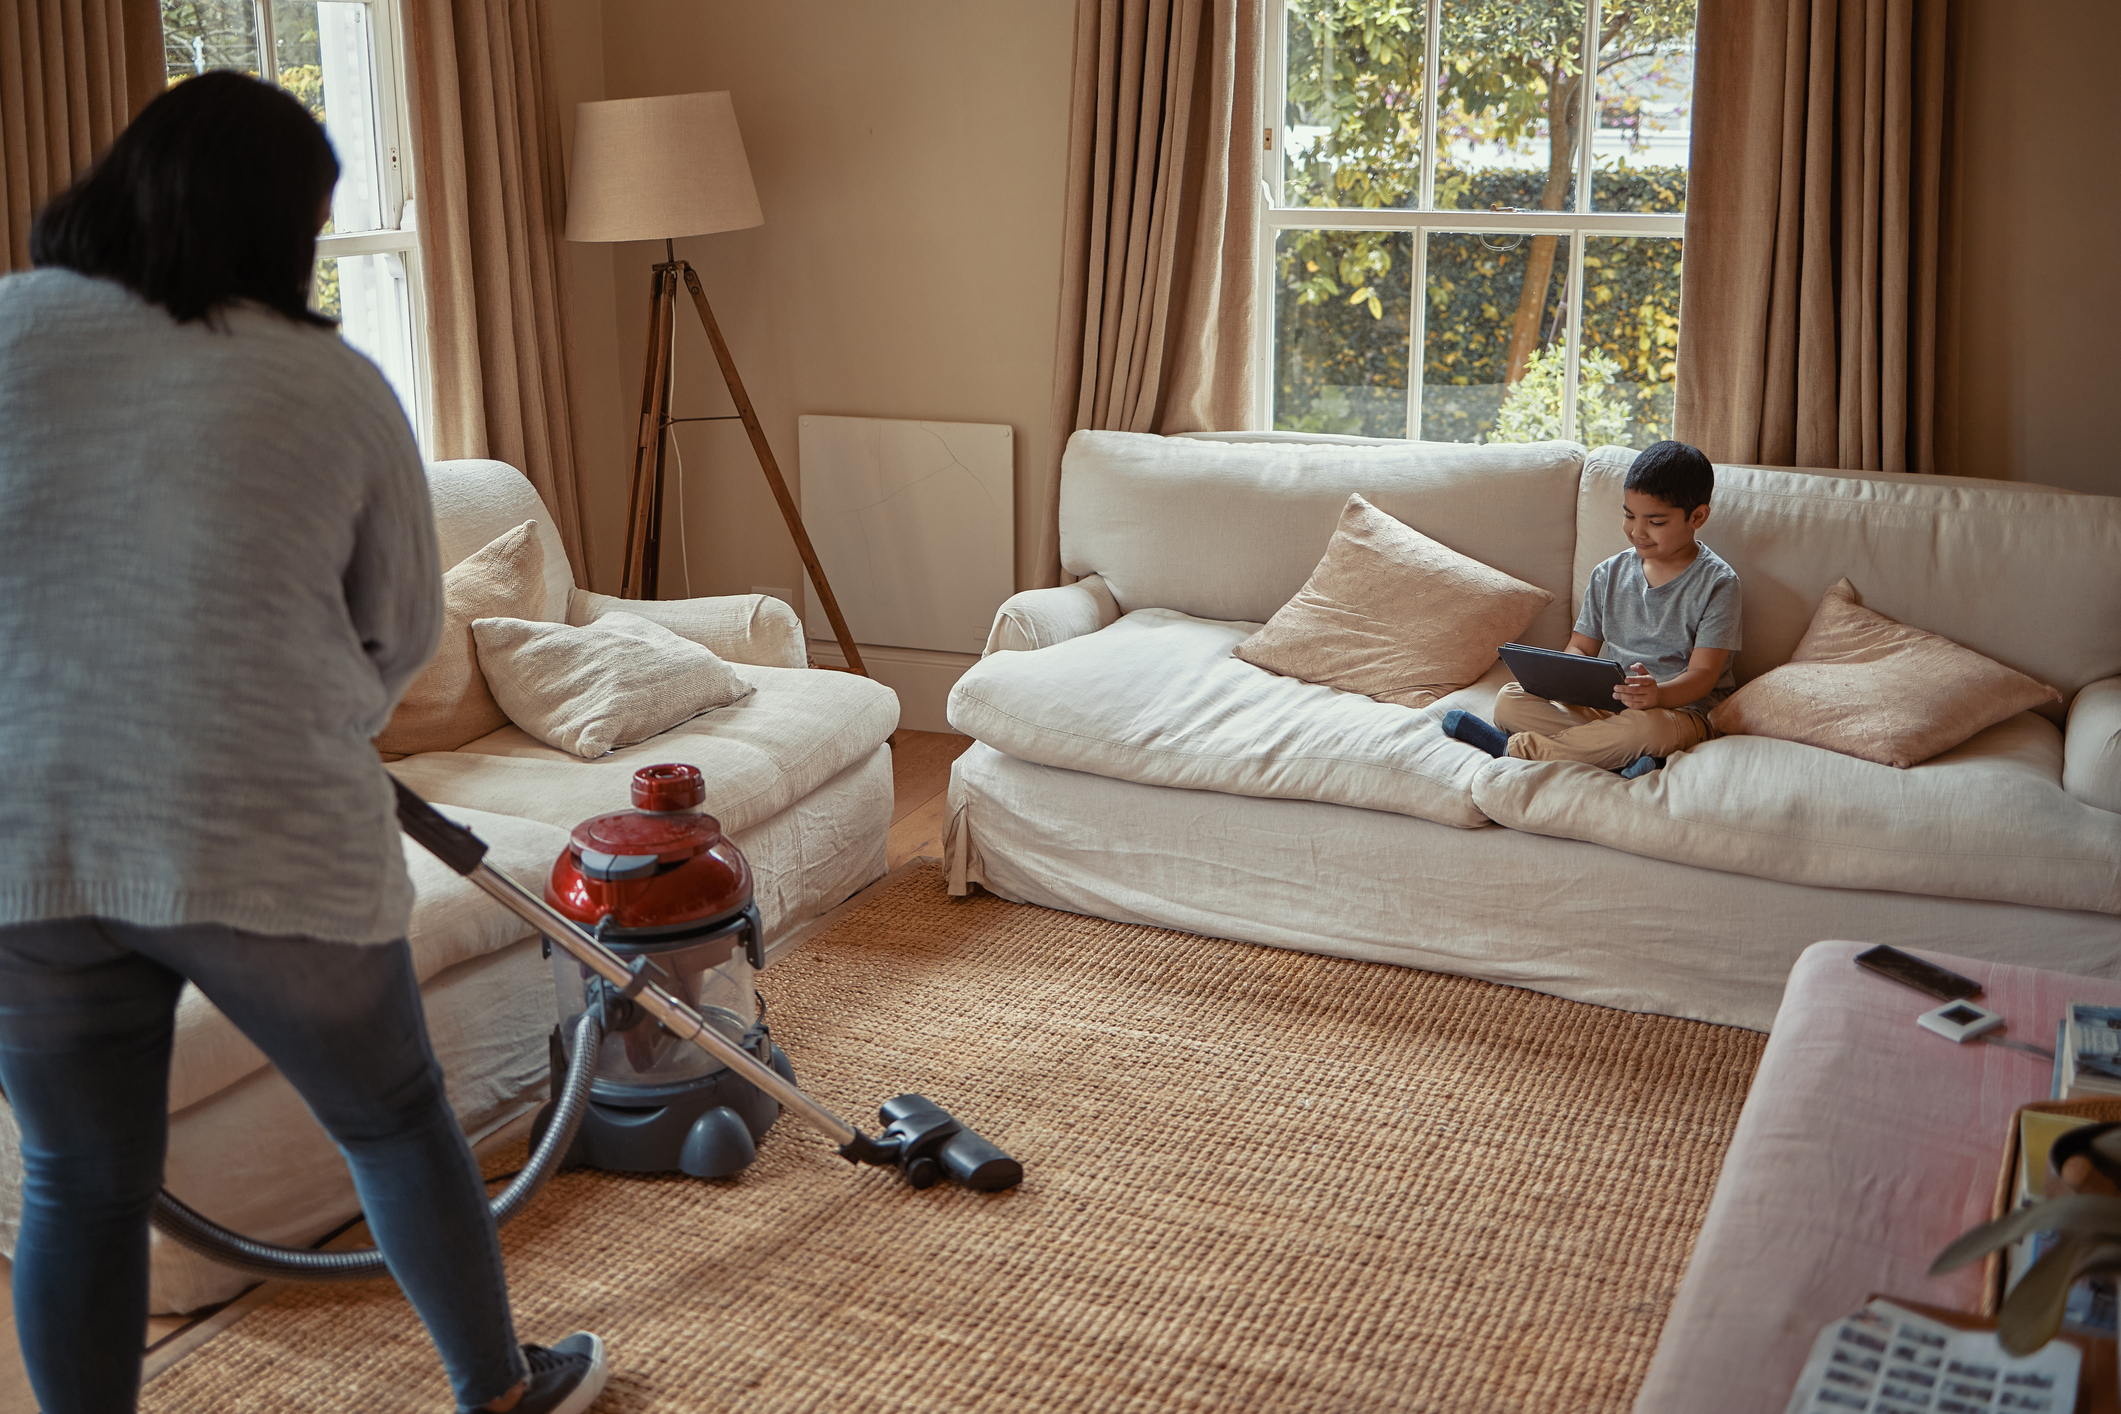 Mom vacuums while child sits on a sofa with a tablet in a living room setting